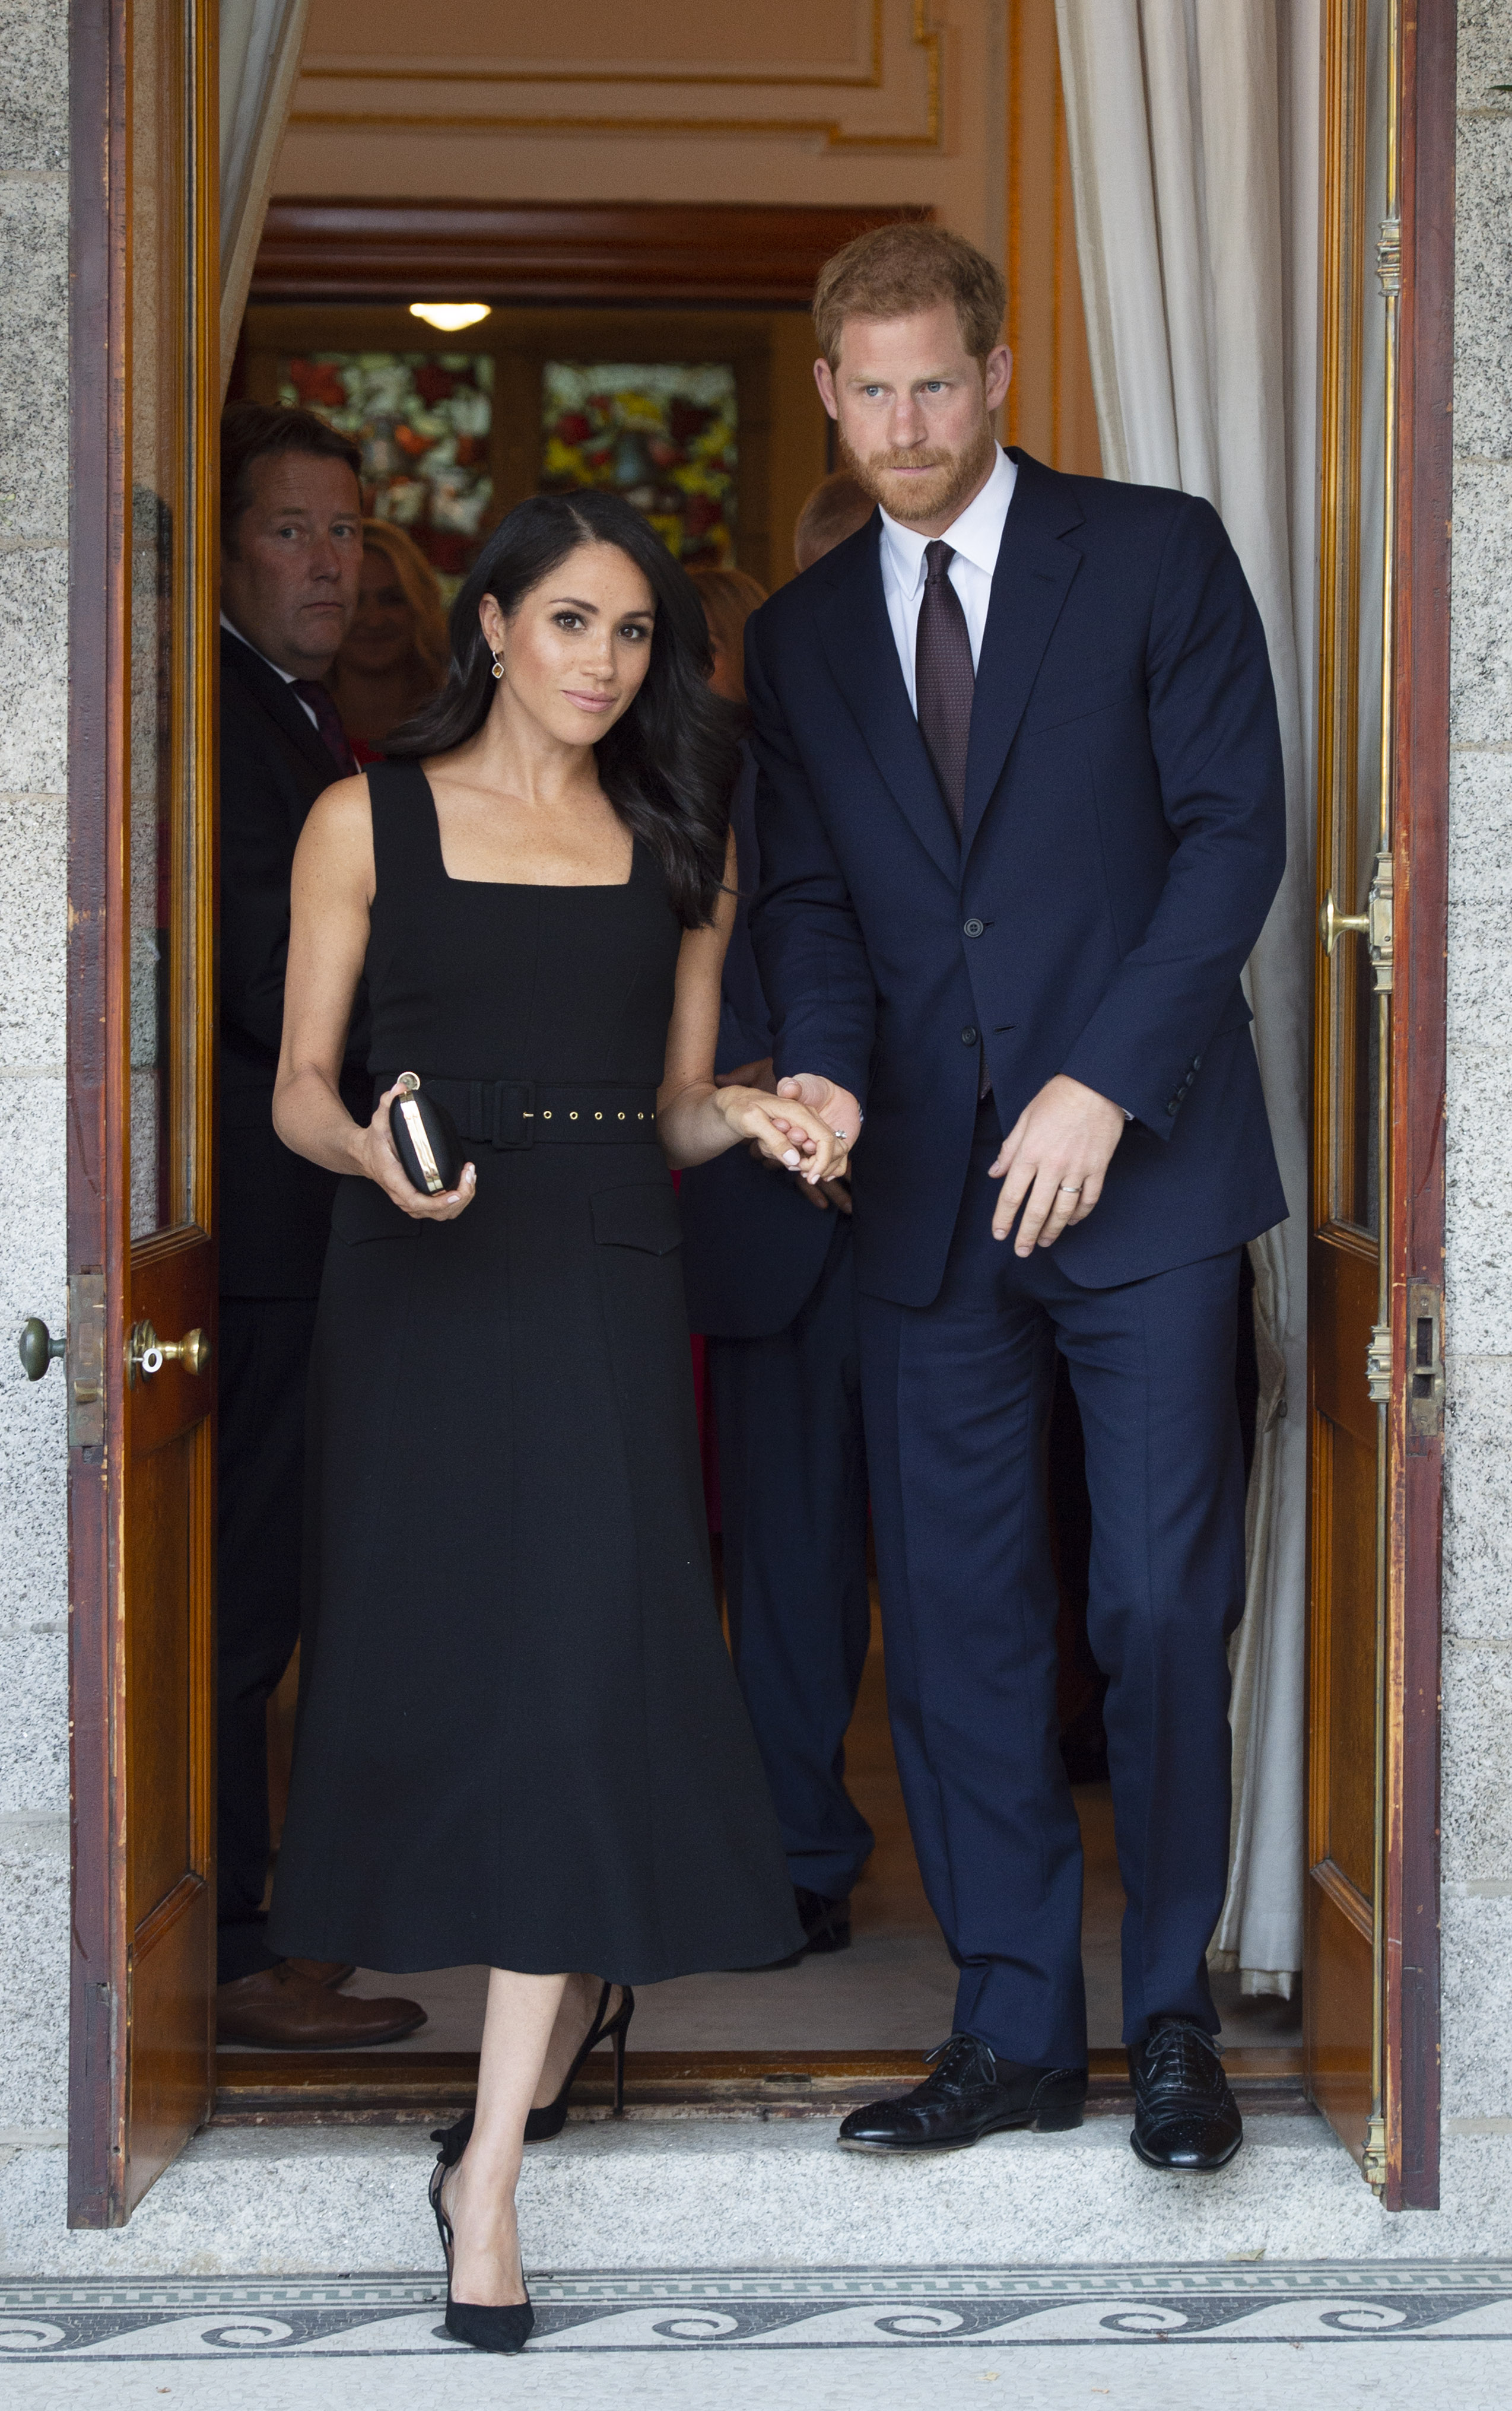 DUBLIN, IRELAND - JULY 10: Prince Harry, Duke of Sussex and Meghan, Duchess of Sussex attend a reception at Glencairn, the residence of Robin Barnett, the British Ambassador to Ireland during day one of their visit to Ireland on July 10, 2018 in Dublin, Ireland. (Photo by Geoff Pugh - WPA Pool/Getty Images) (WPA Pool—Getty Images)